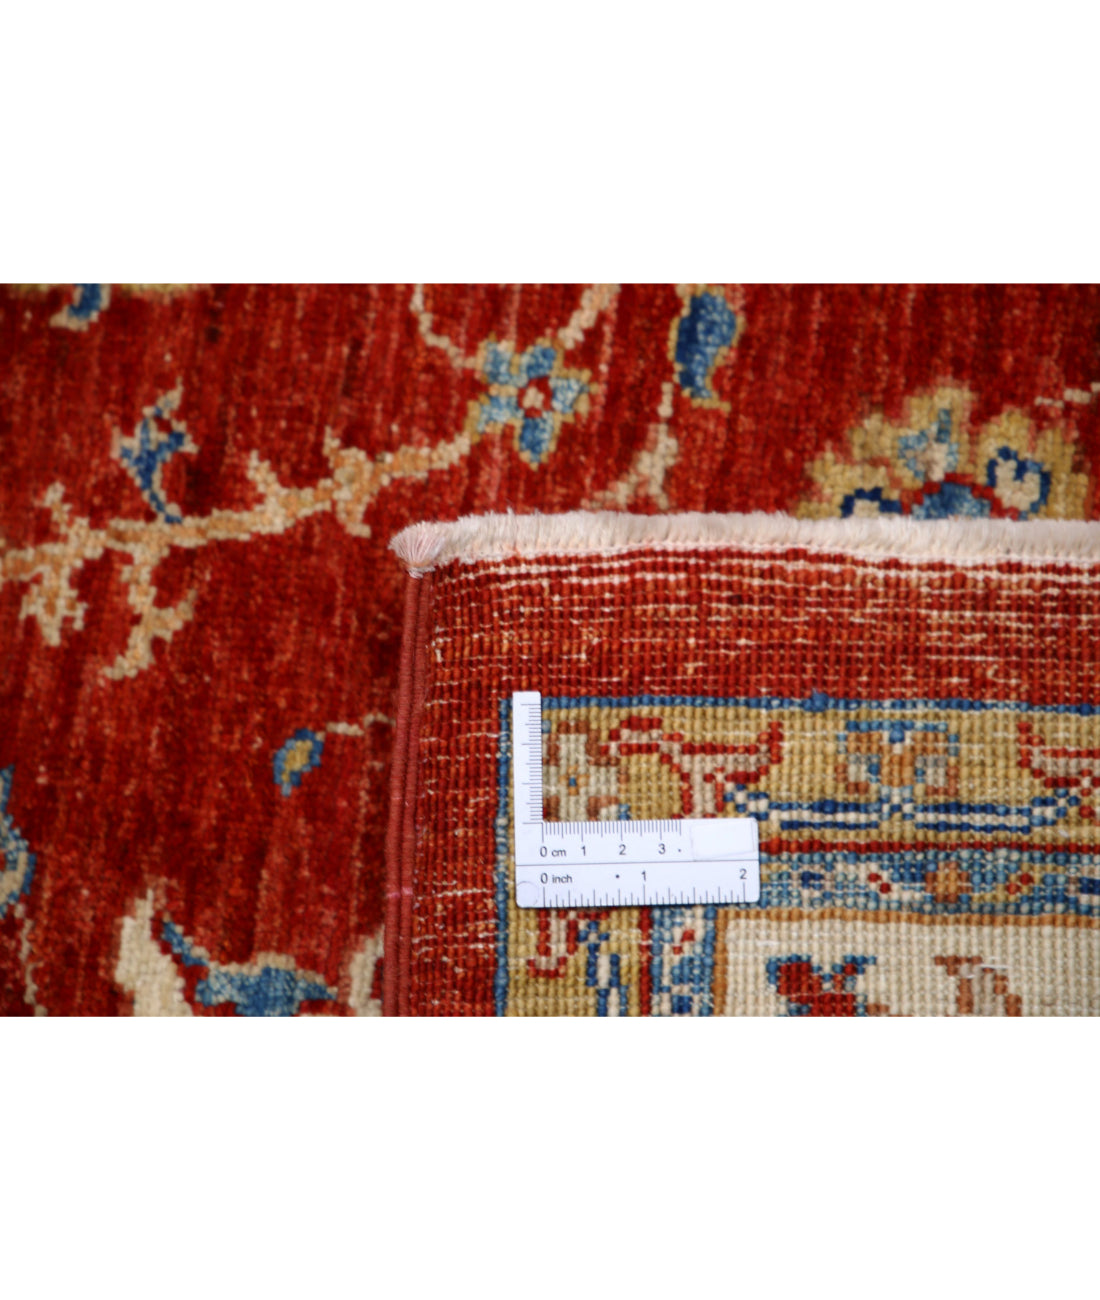 Ziegler 5'7'' X 8'0'' Hand-Knotted Wool Rug 5'7'' x 8'0'' (168 X 240) / Red / Ivory